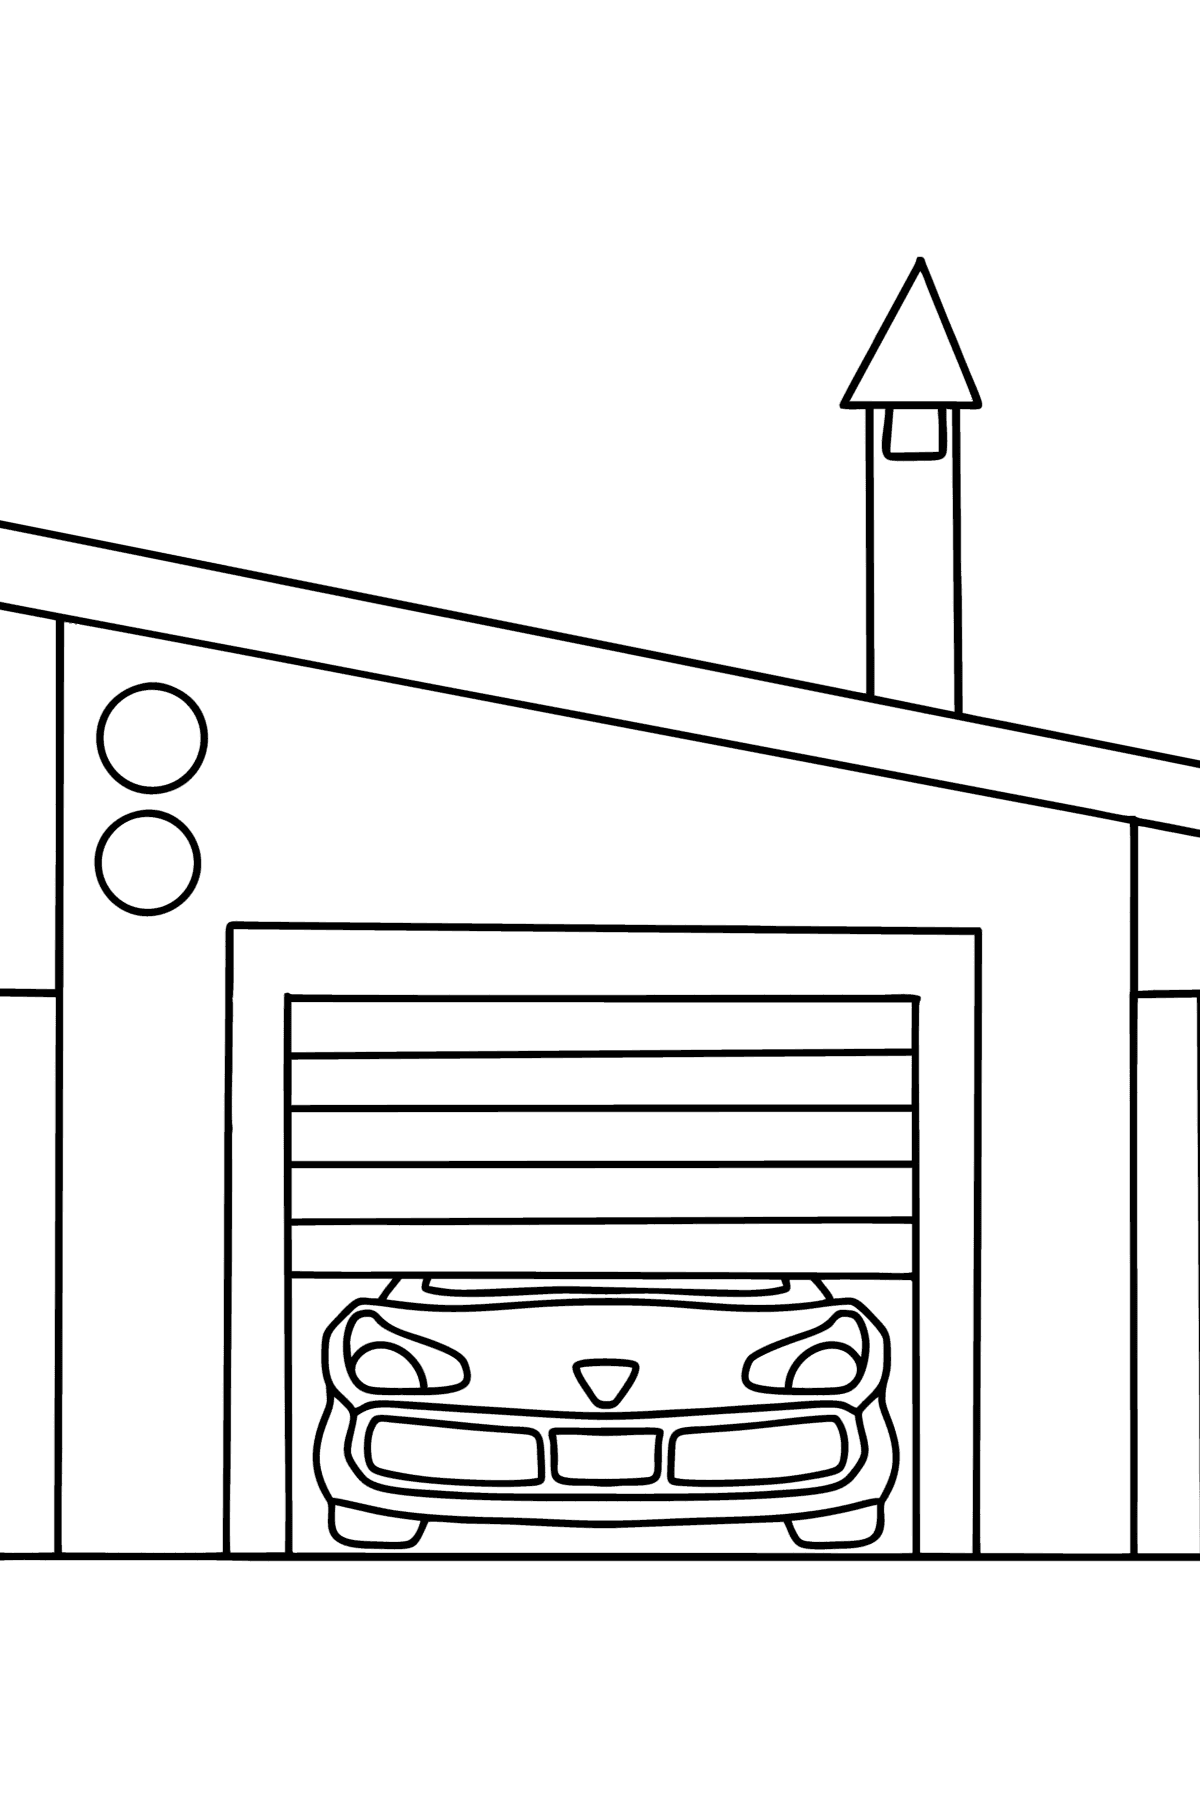 Garage coloring page - Coloring Pages for Kids